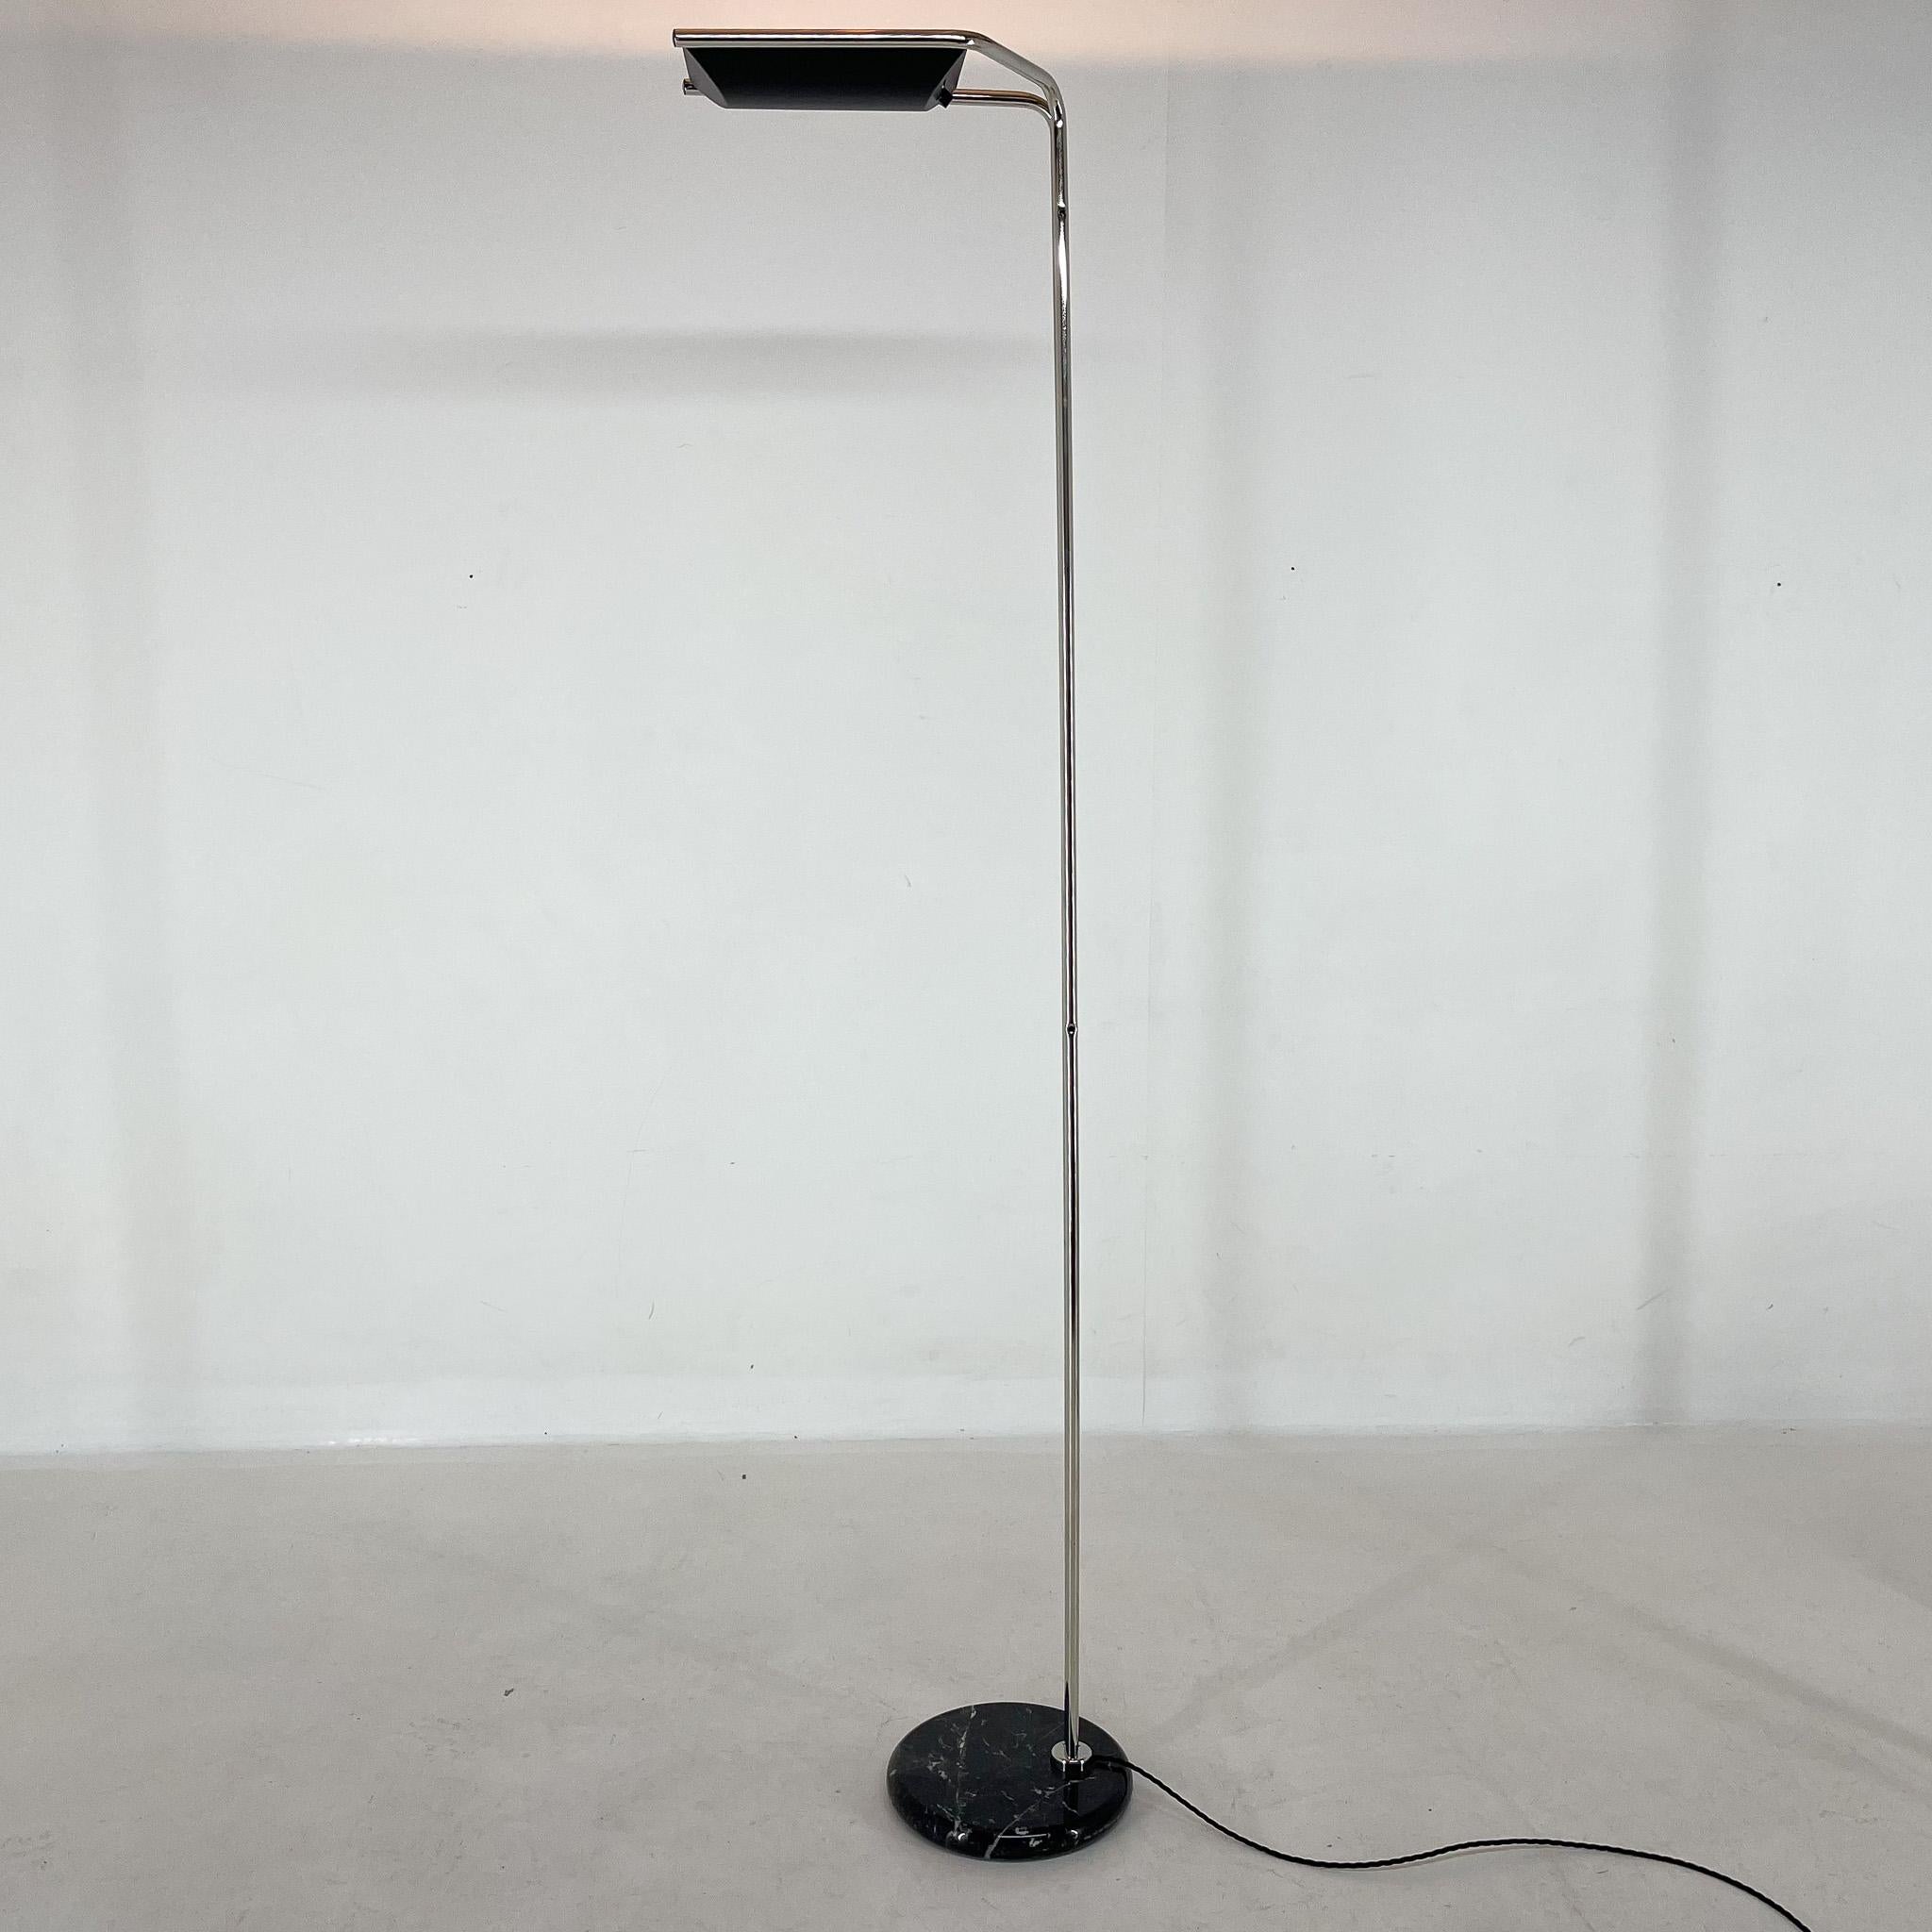 Vintage design floor lamp by Bruno Geschelin for Guzzini, produced in Italy in the 1970's. Made of chrome with marble base, dimmer, renovated, rewired.